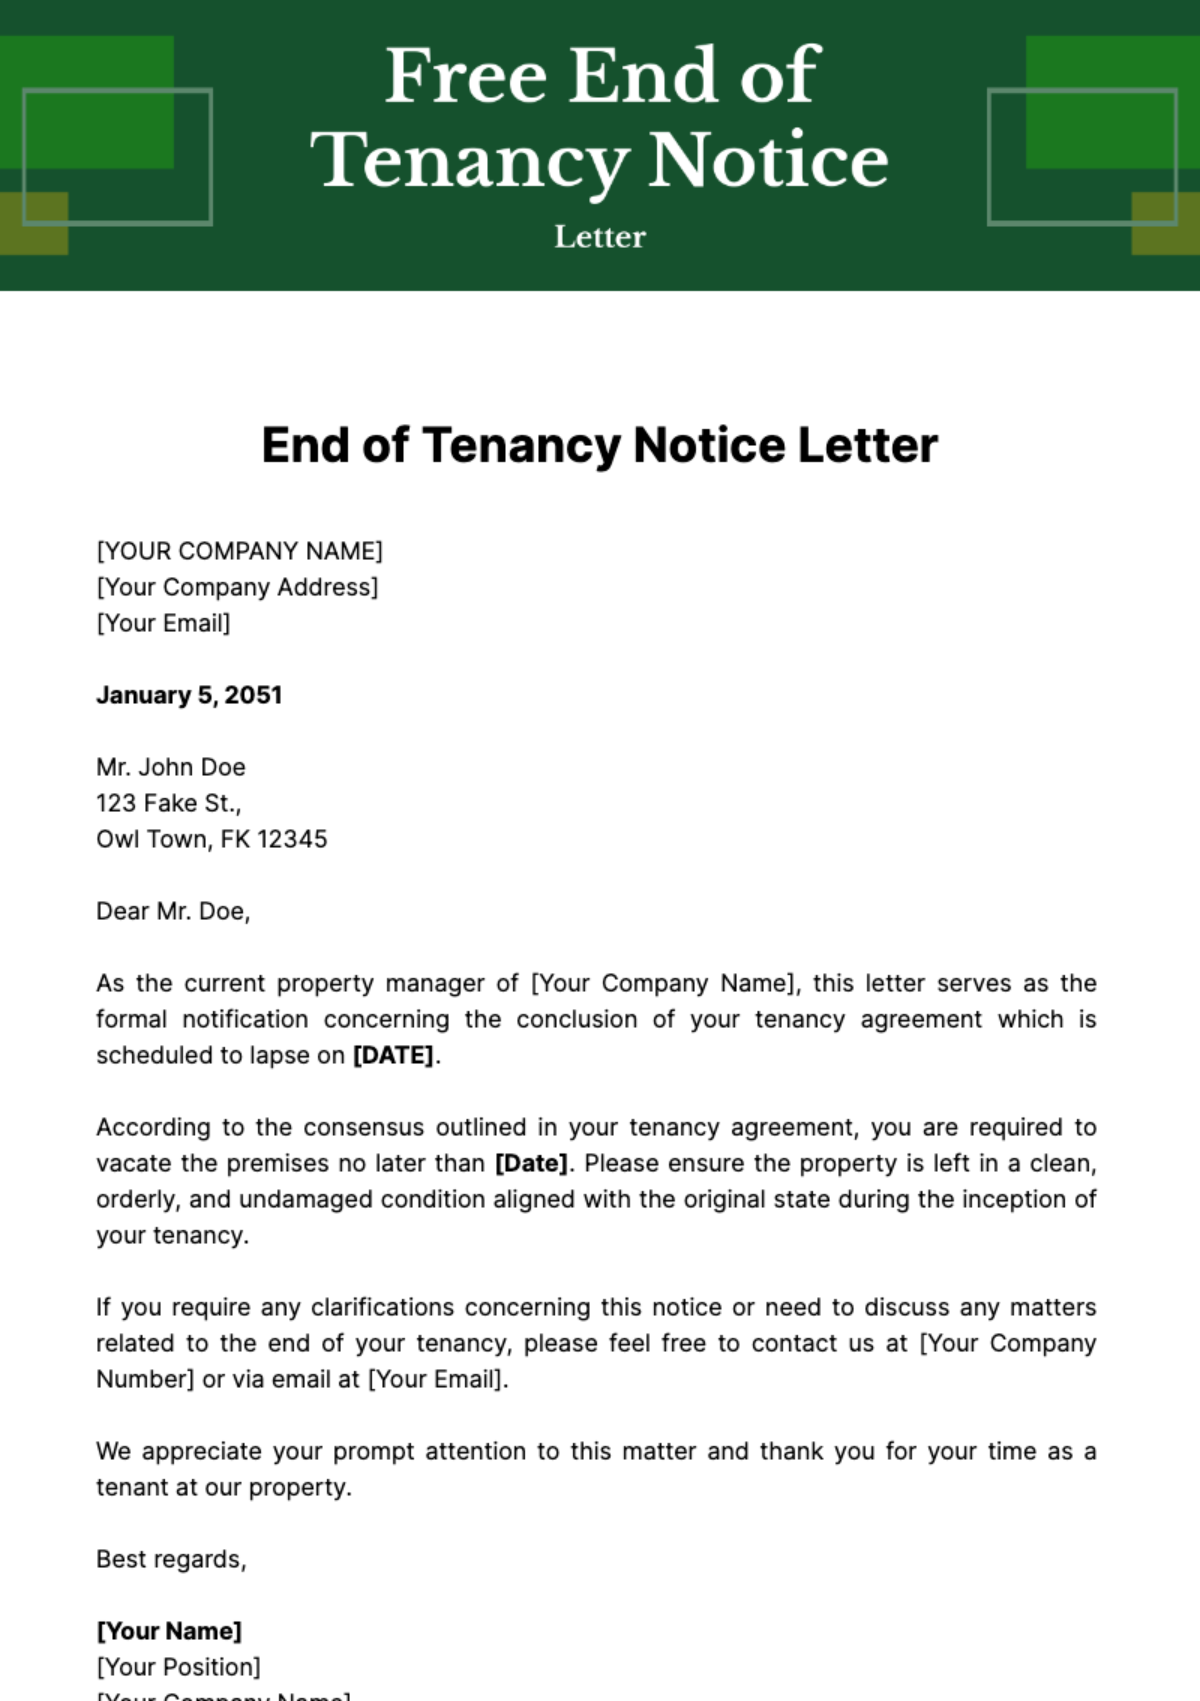 Free End of Tenancy Notice Letter Template